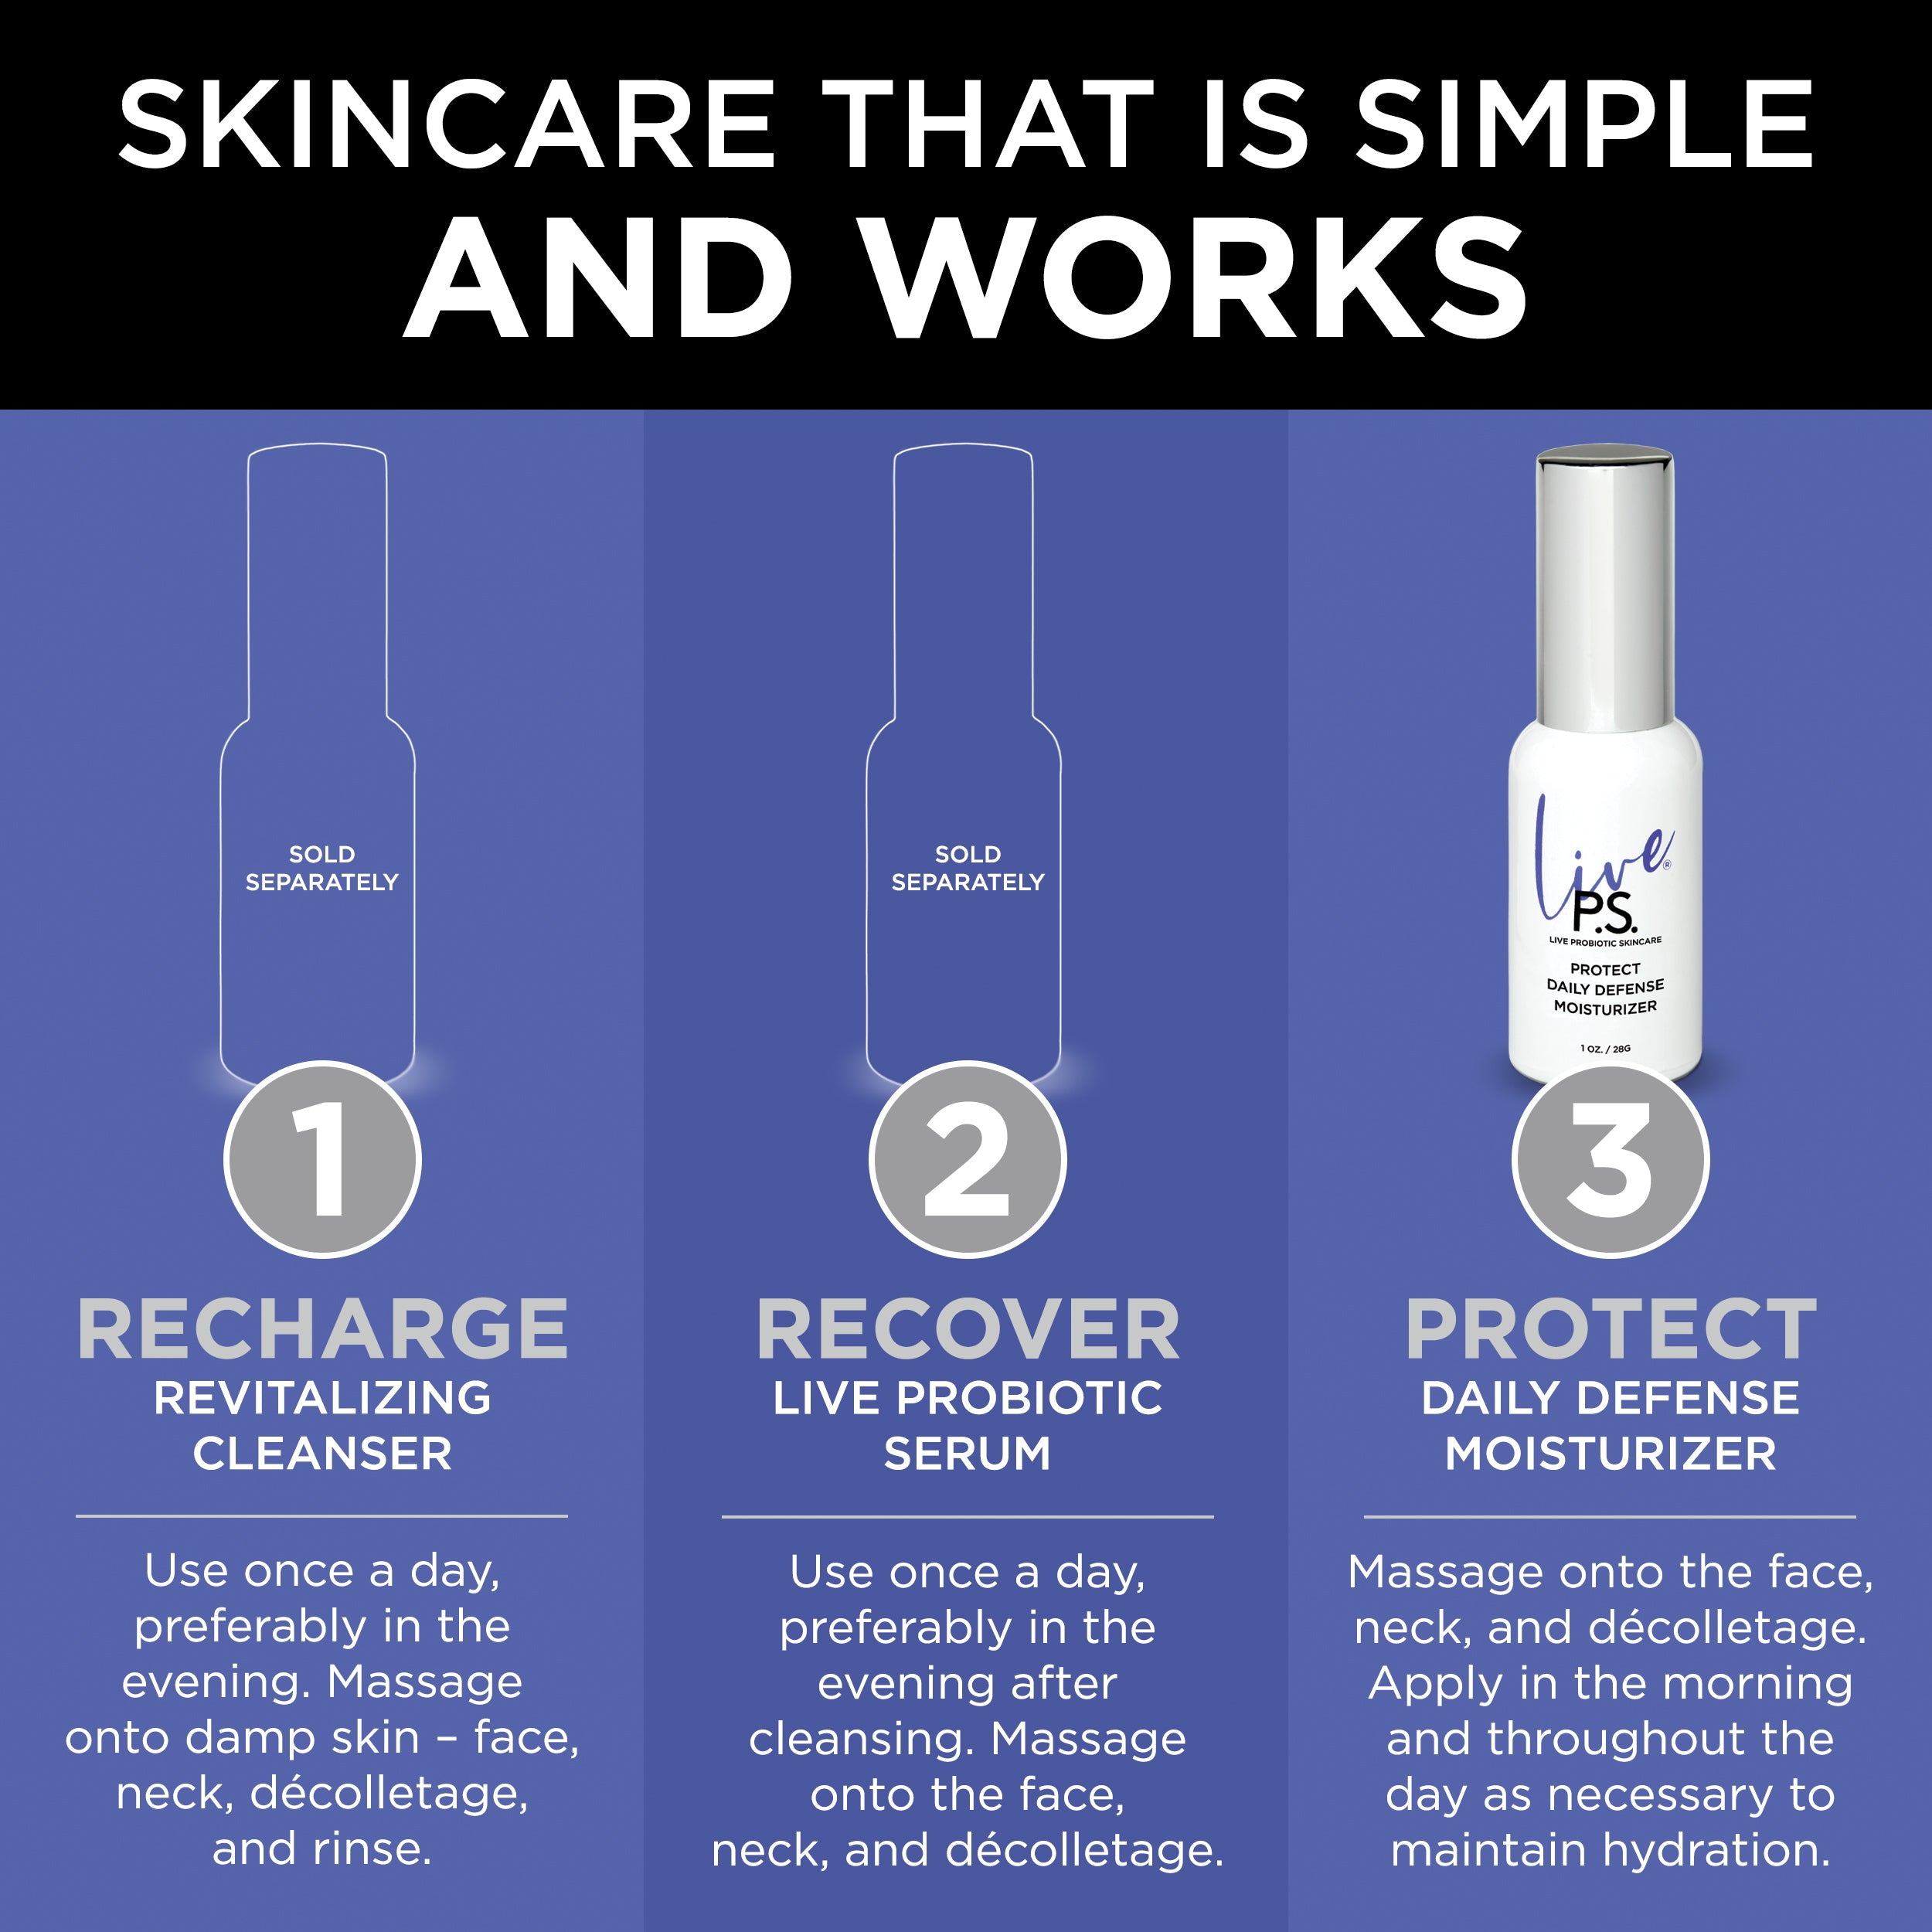 Protect Daily Defense Moisturizer | Live P.S.